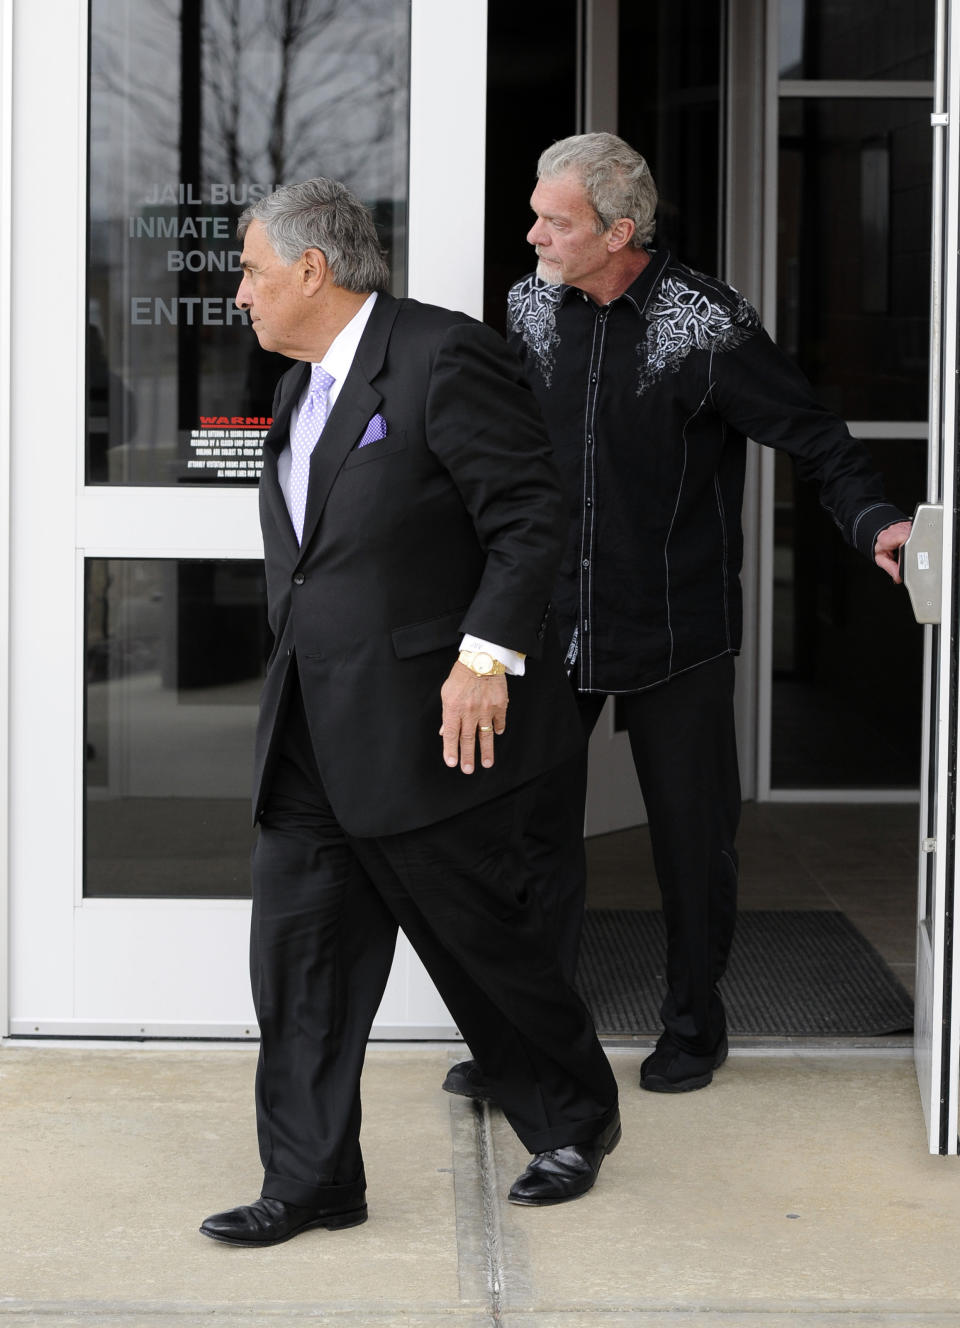 Attorney James Voyles, left and Indianapolis Colts owner Jim Irsay leave the Hamilton County Jail in Indianapolis, Monday, March 17, 2014. Irsay was released from jail Monday after being held overnight following a traffic stop in which police said he failed sobriety tests and had multiple prescription drugs inside his vehicle. Irsay was pulled over late Sunday after he was spotted driving slowly near his home in suburban Carmel, stopping in the roadway and failing to use a turn signal. (AP Photo/Alan Petersime)